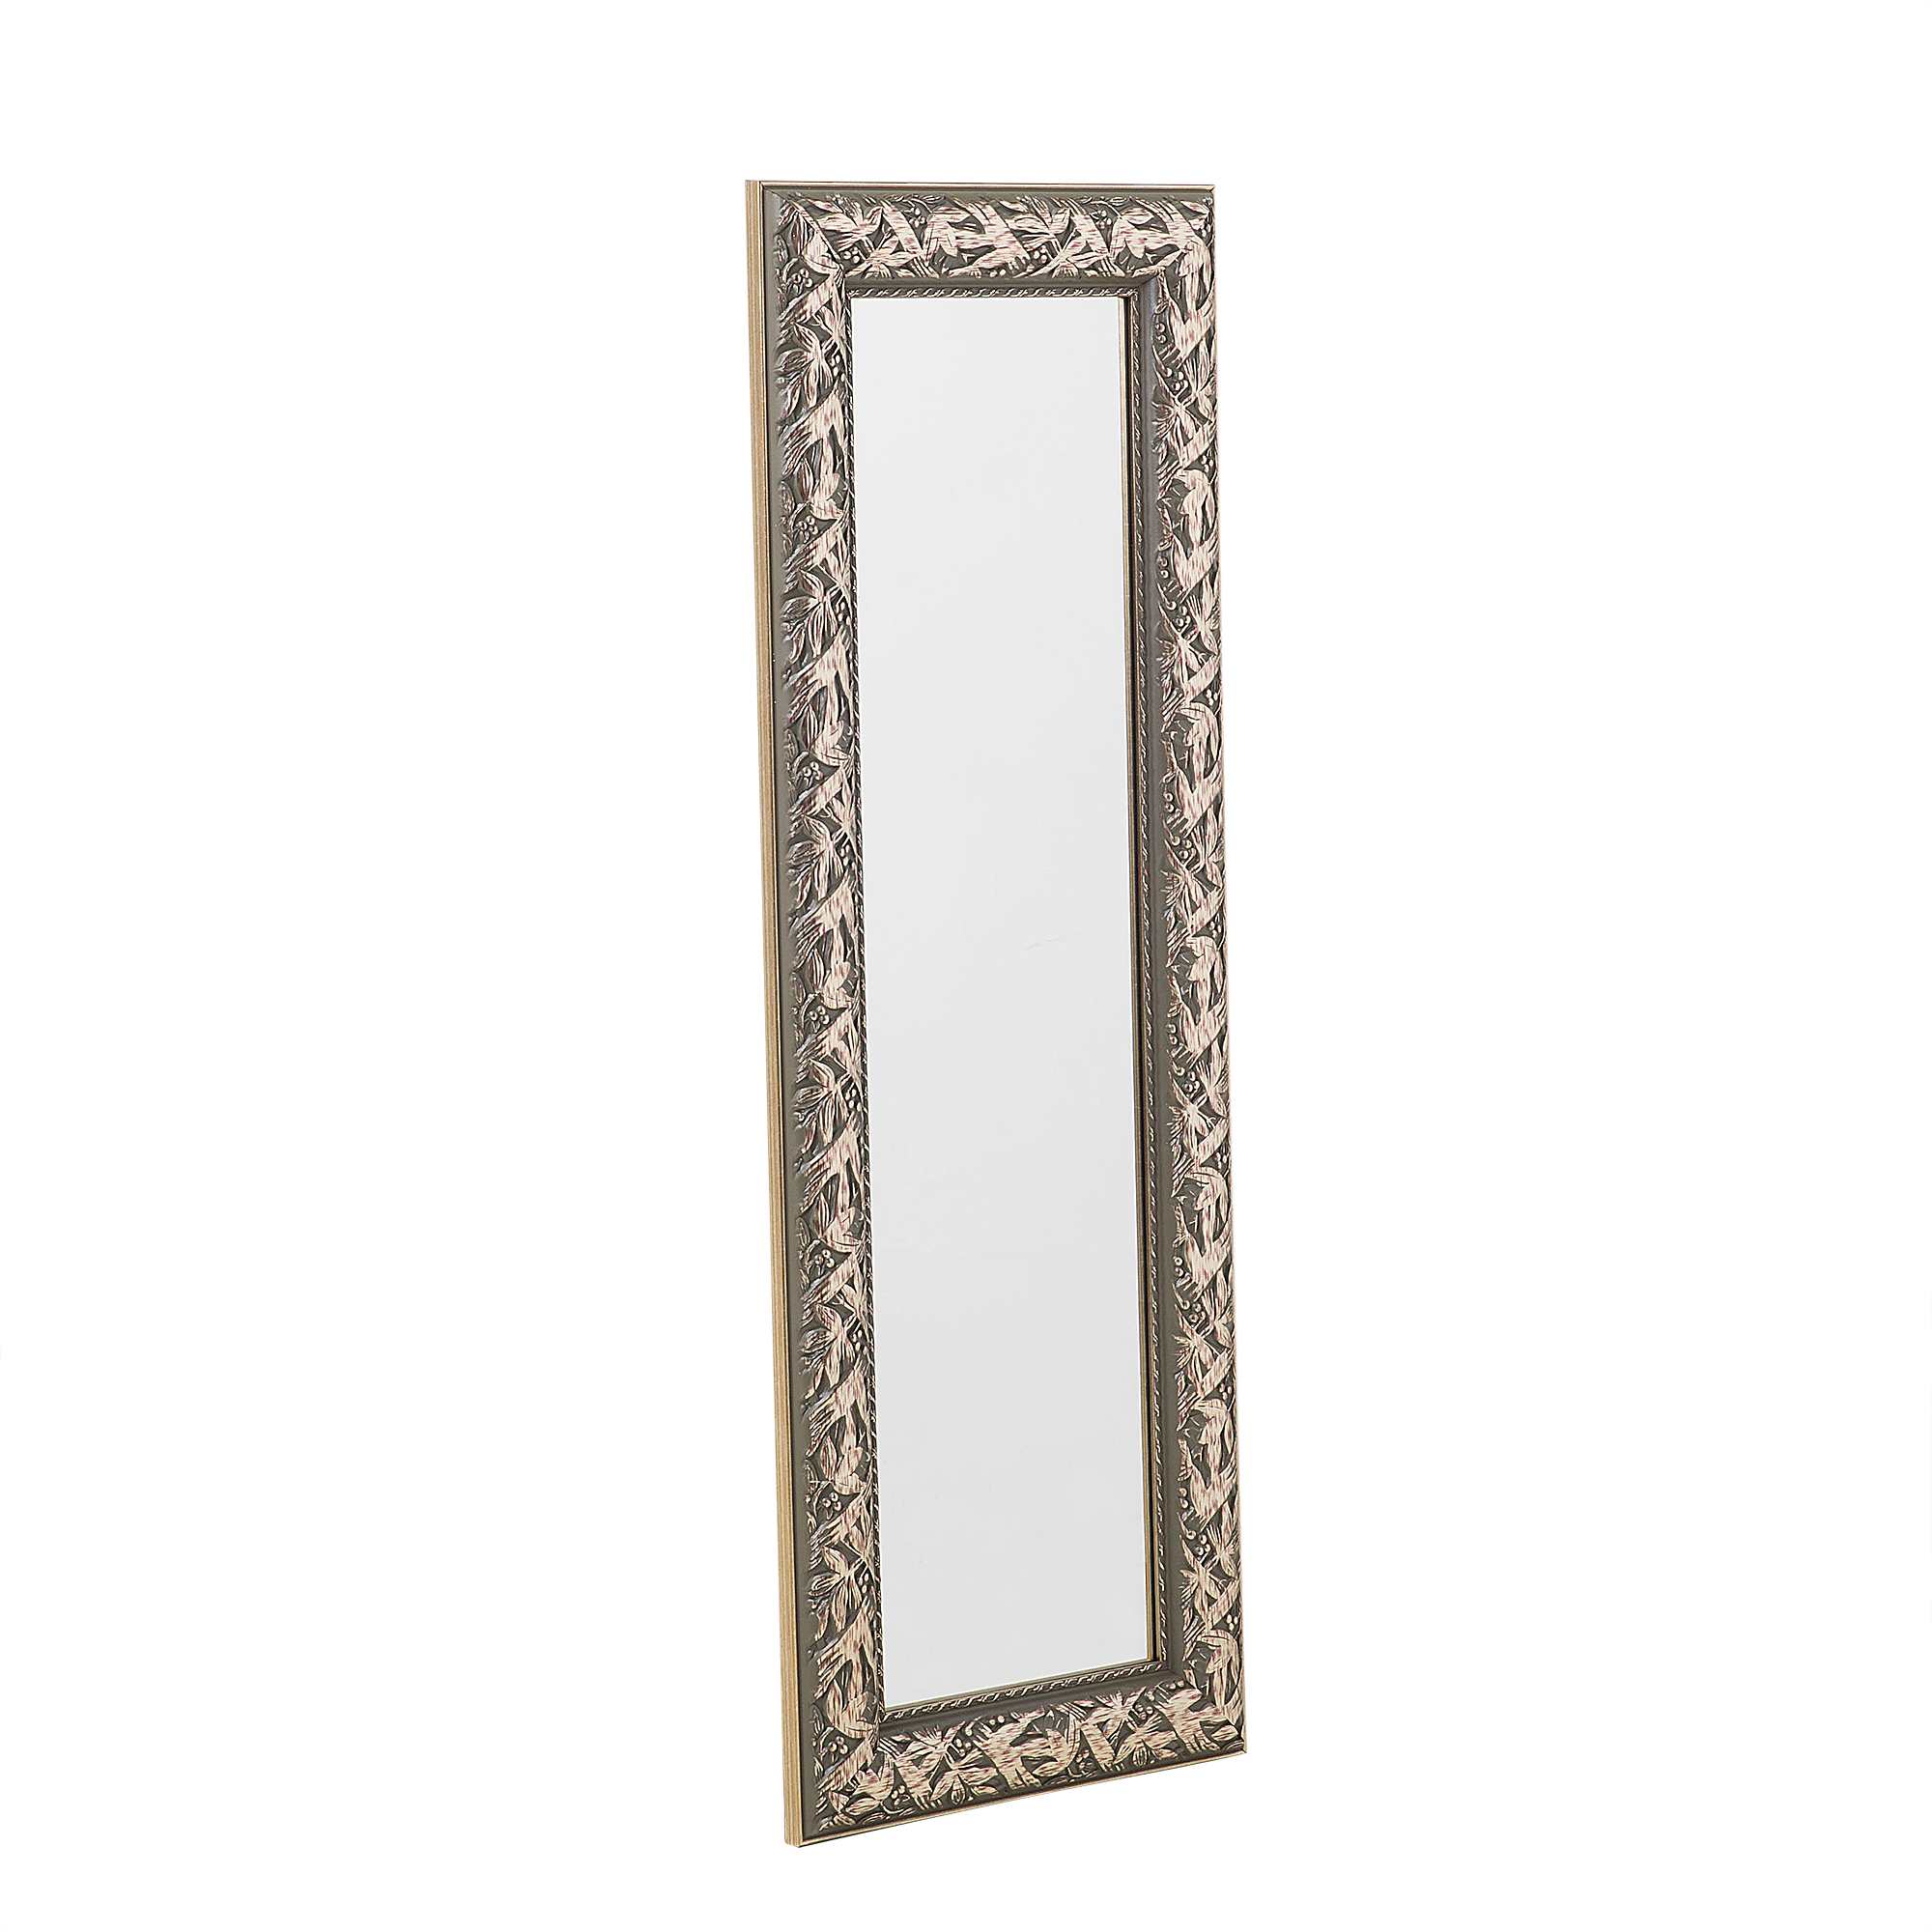 Beliani Wall Hanging Mirror Gold 51 x 141 cm Decorative Distressed Frame Living Room Classic Vintage French Style